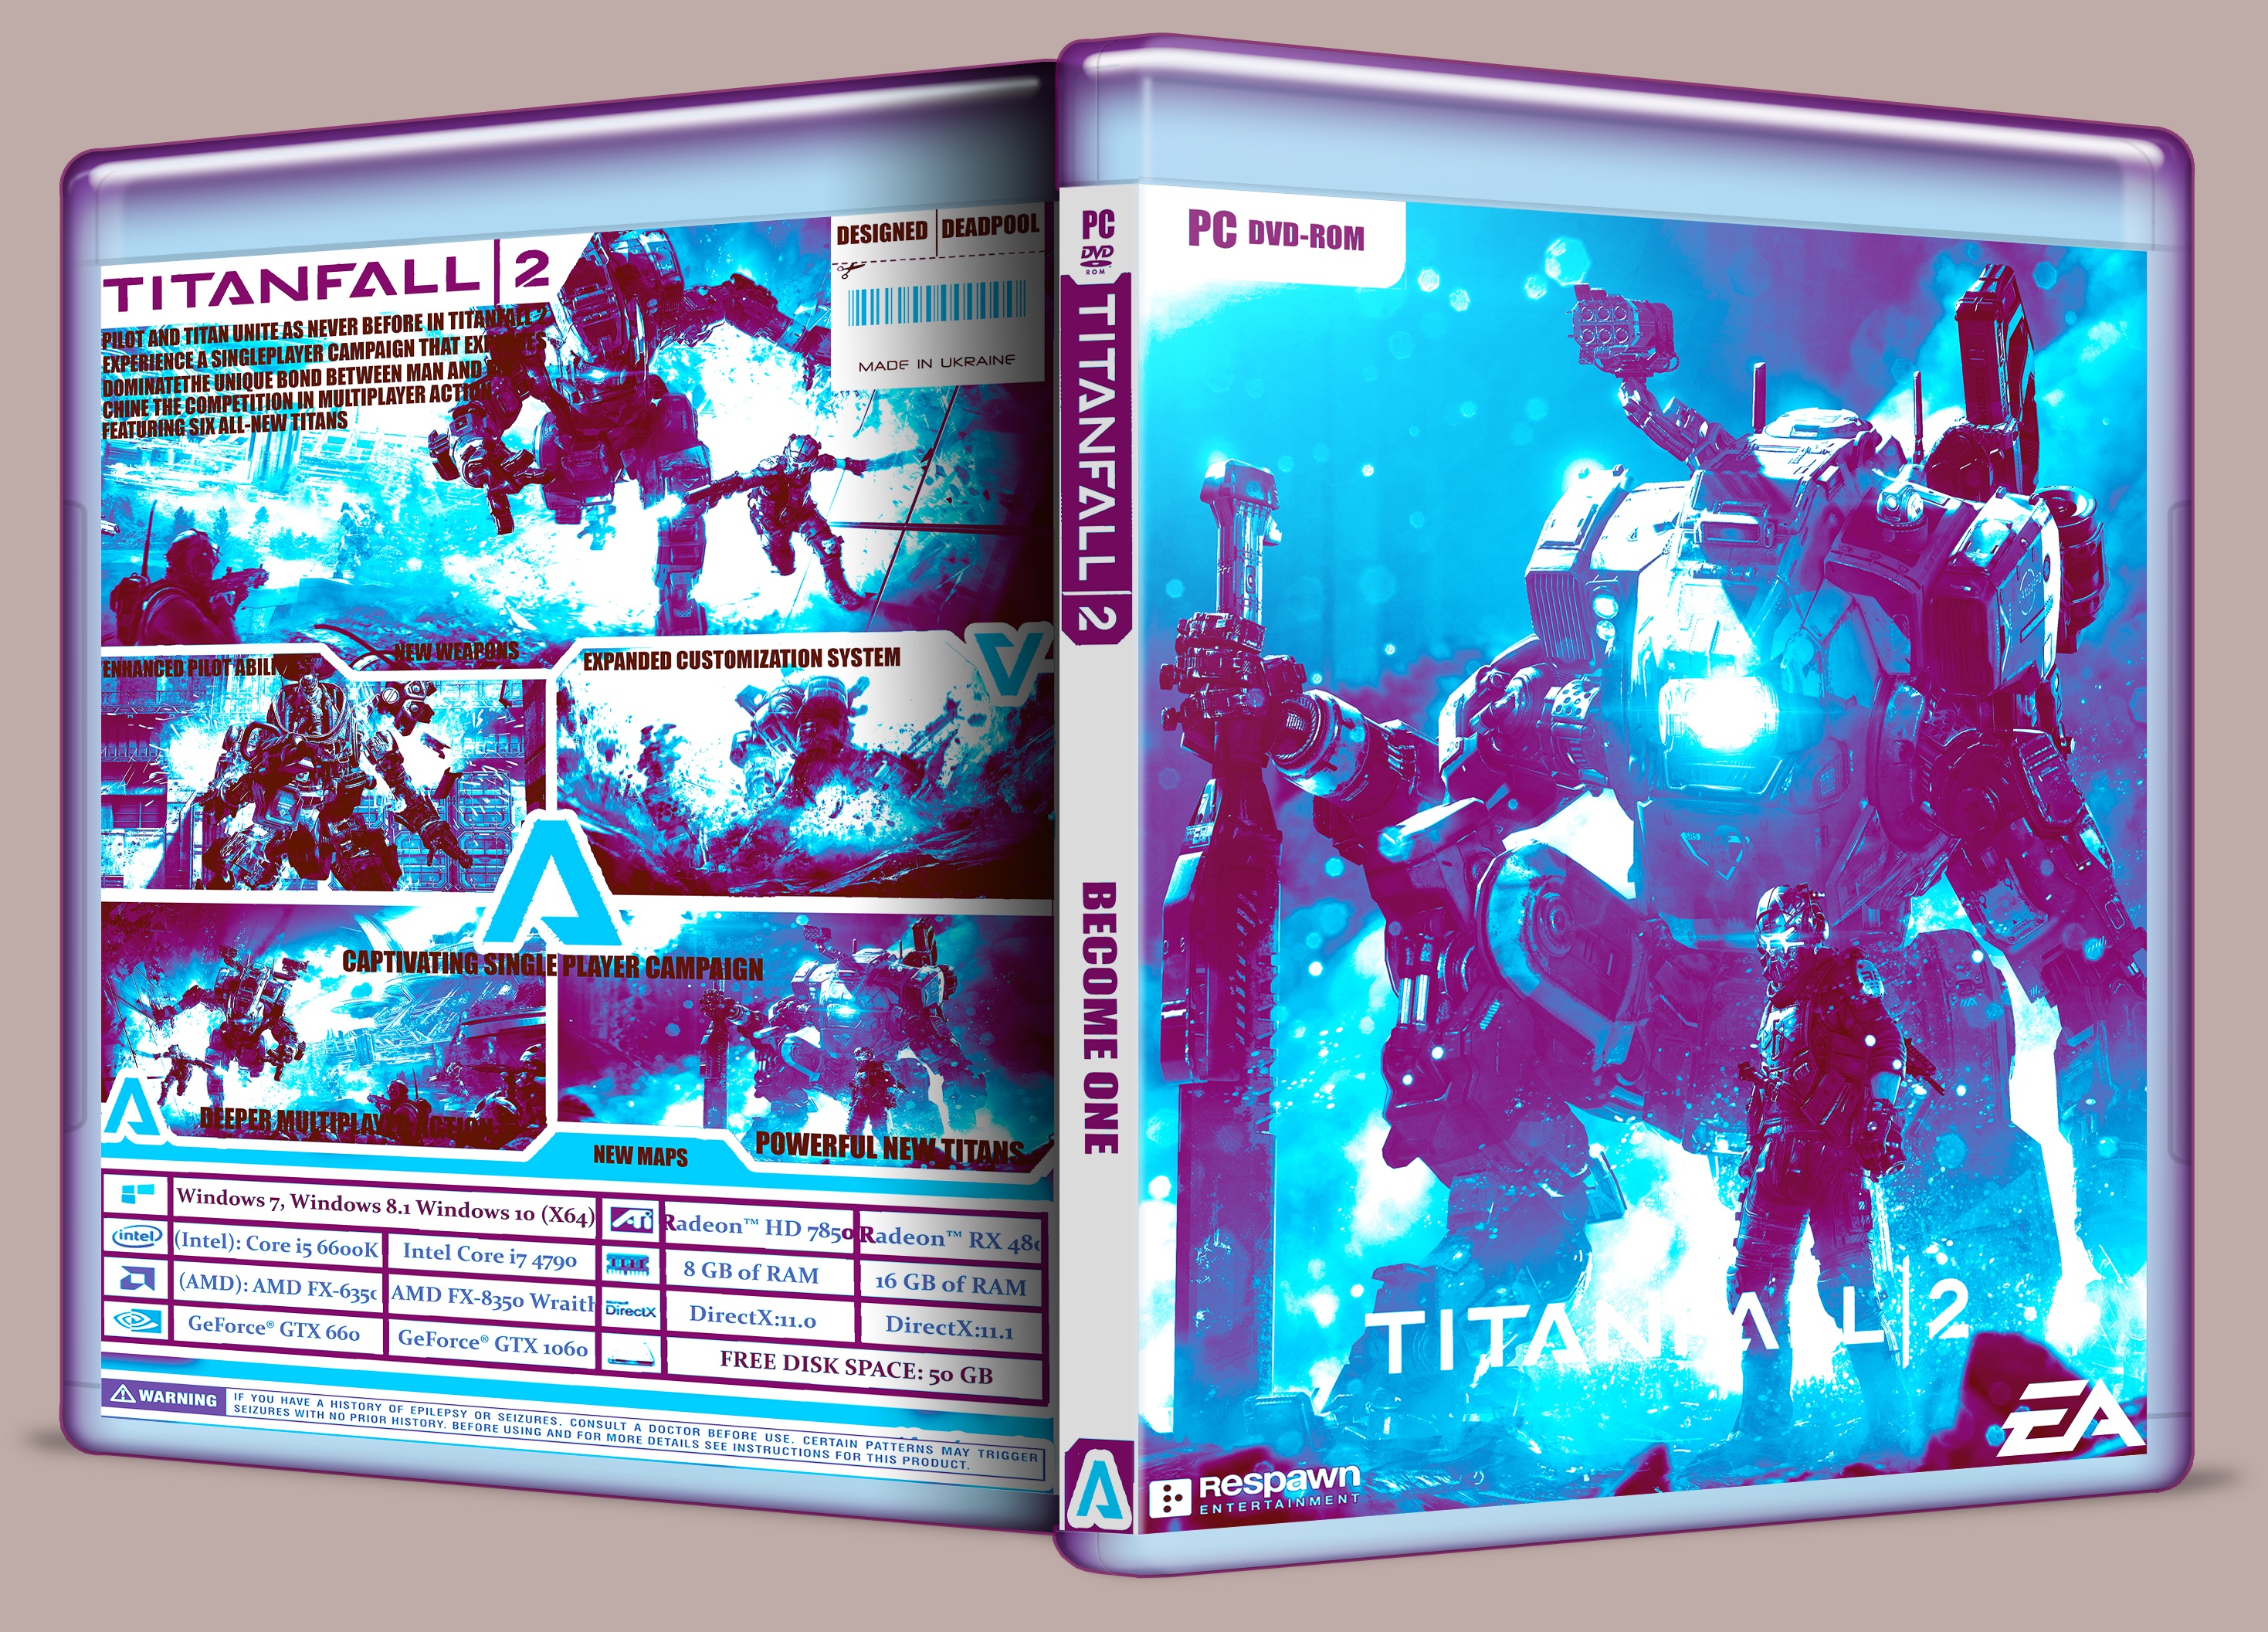 TITANFALL 2 box cover